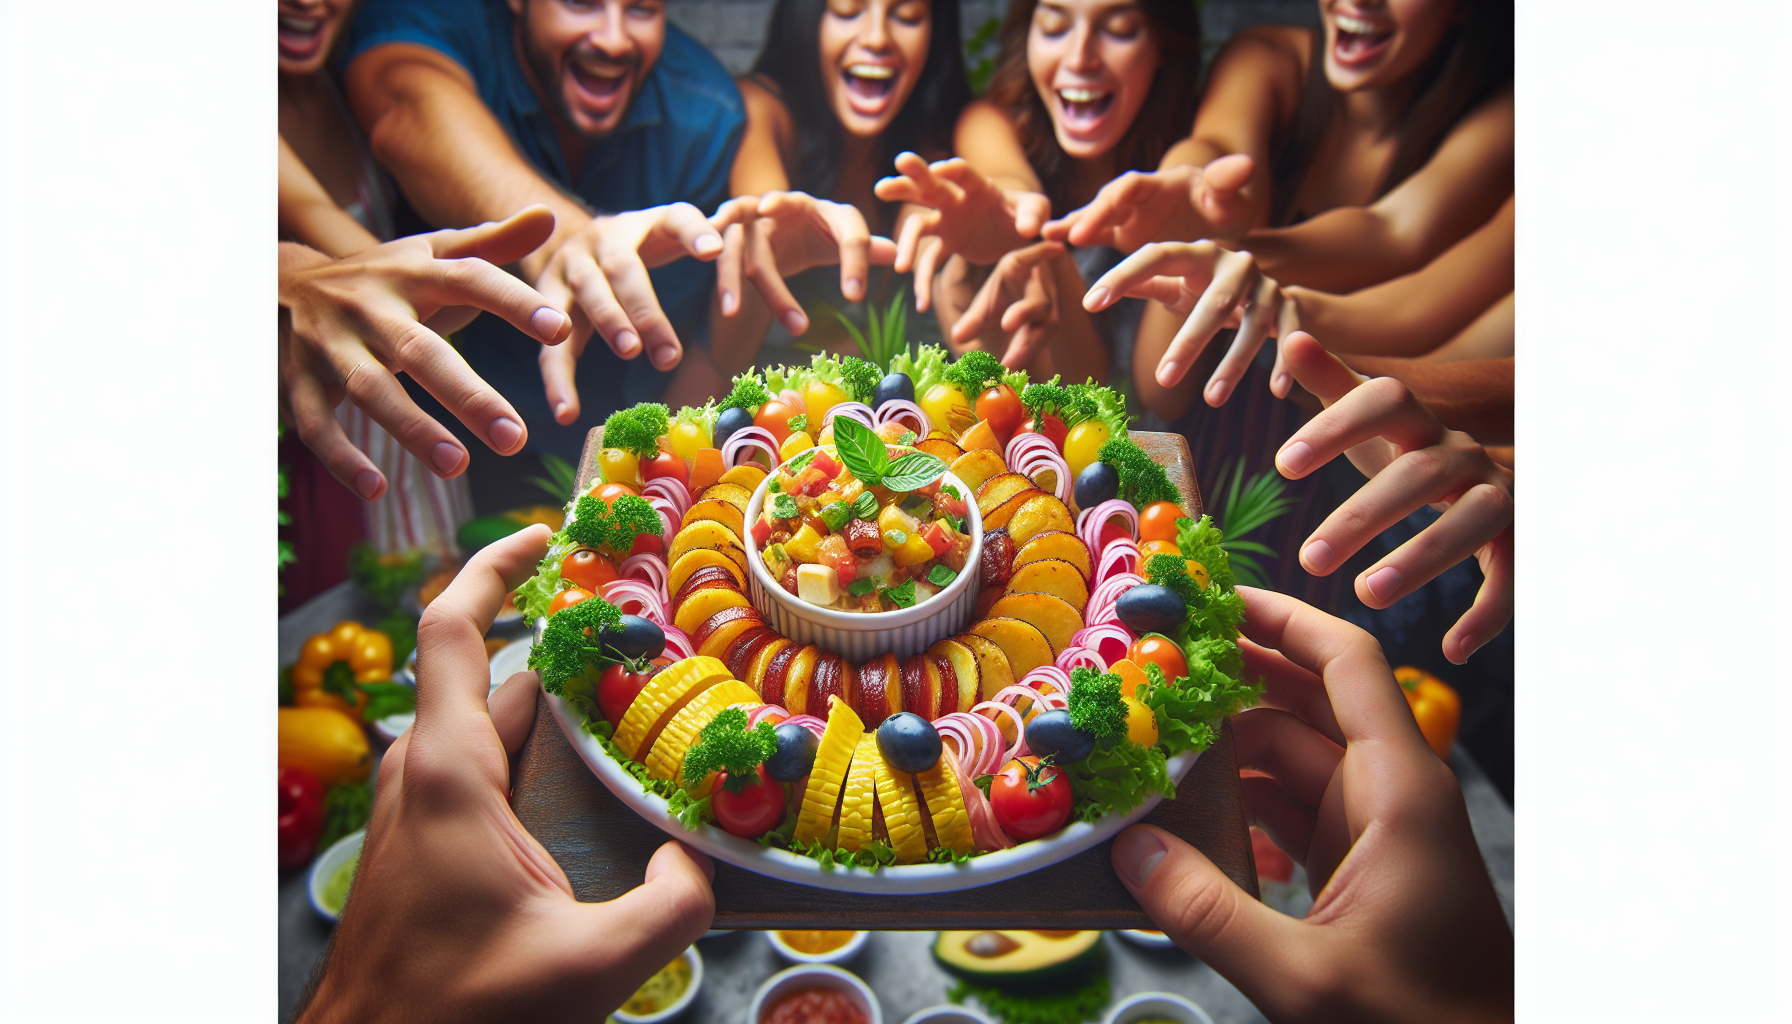 Can You Recommend A Brazilian Appetizer Thats Easy To Share At Parties?